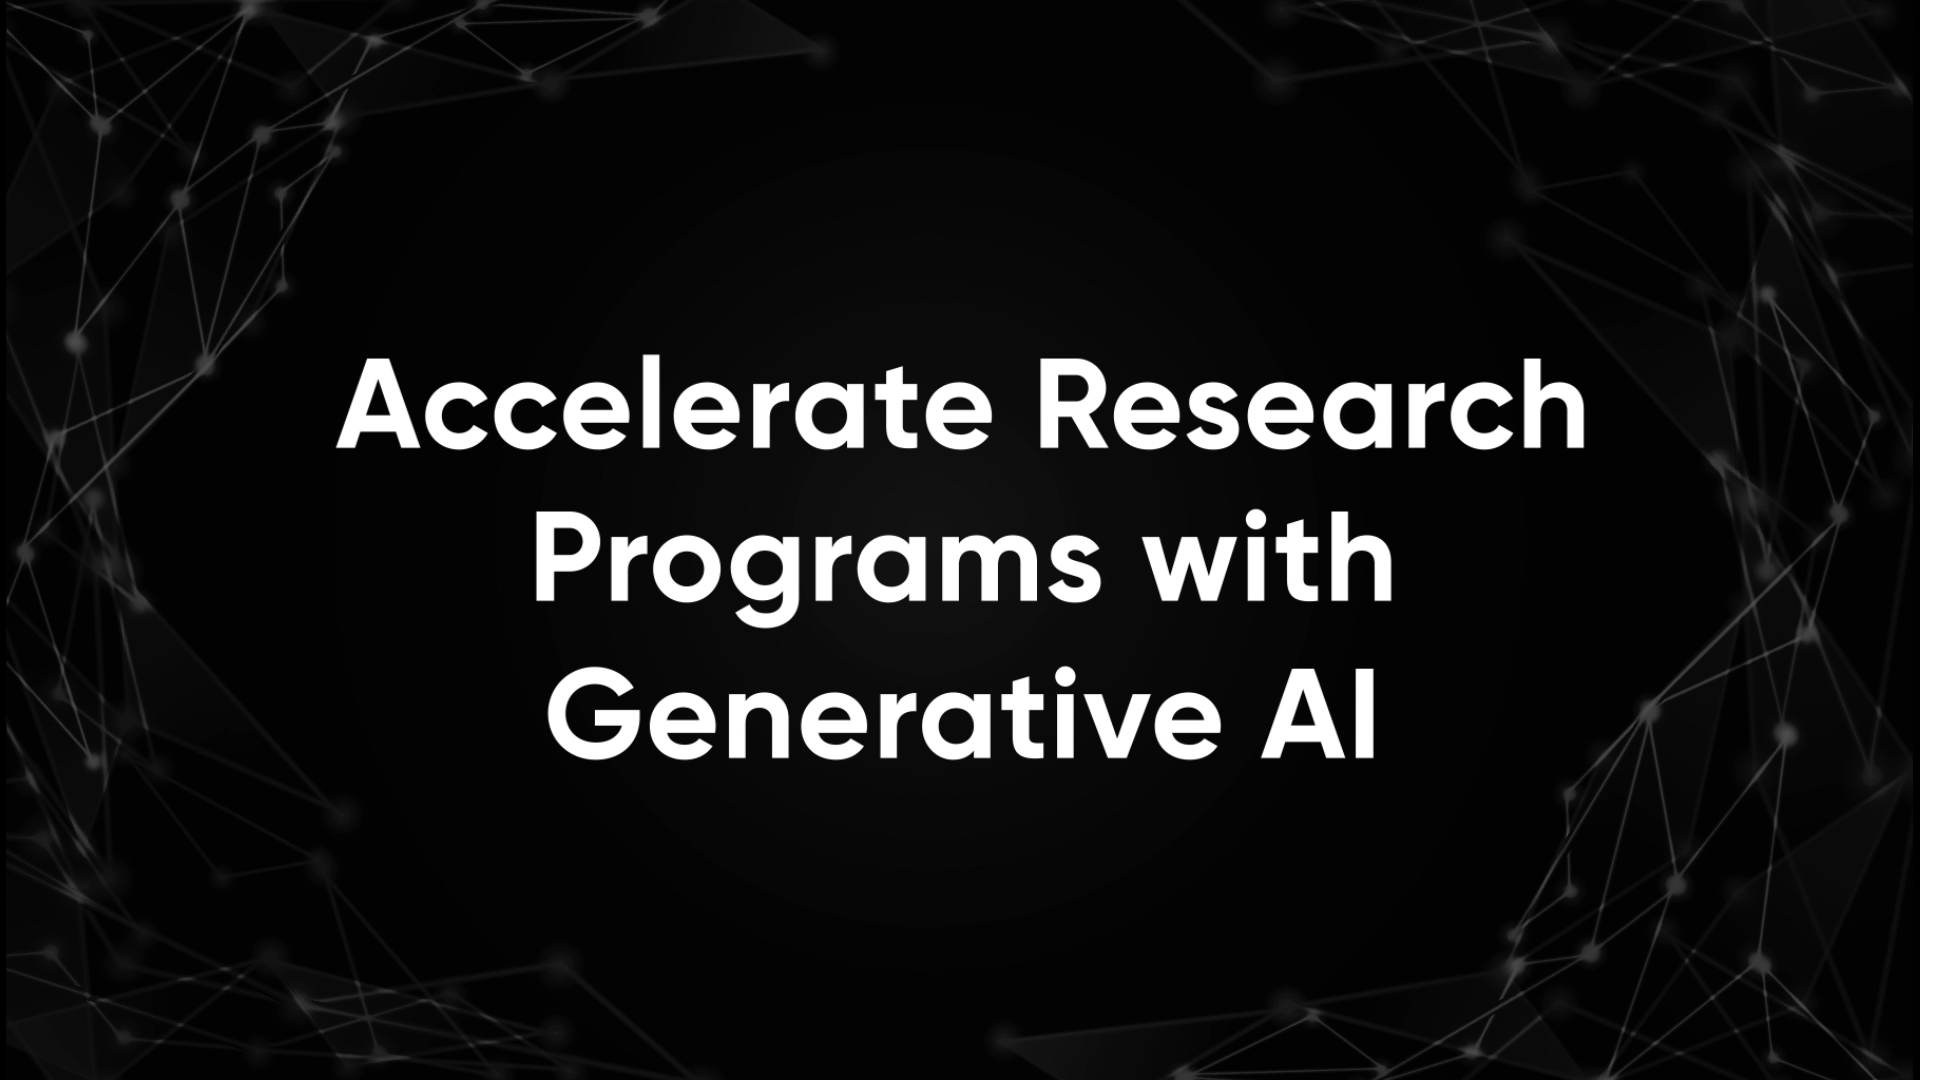 Accelerate Research Programs